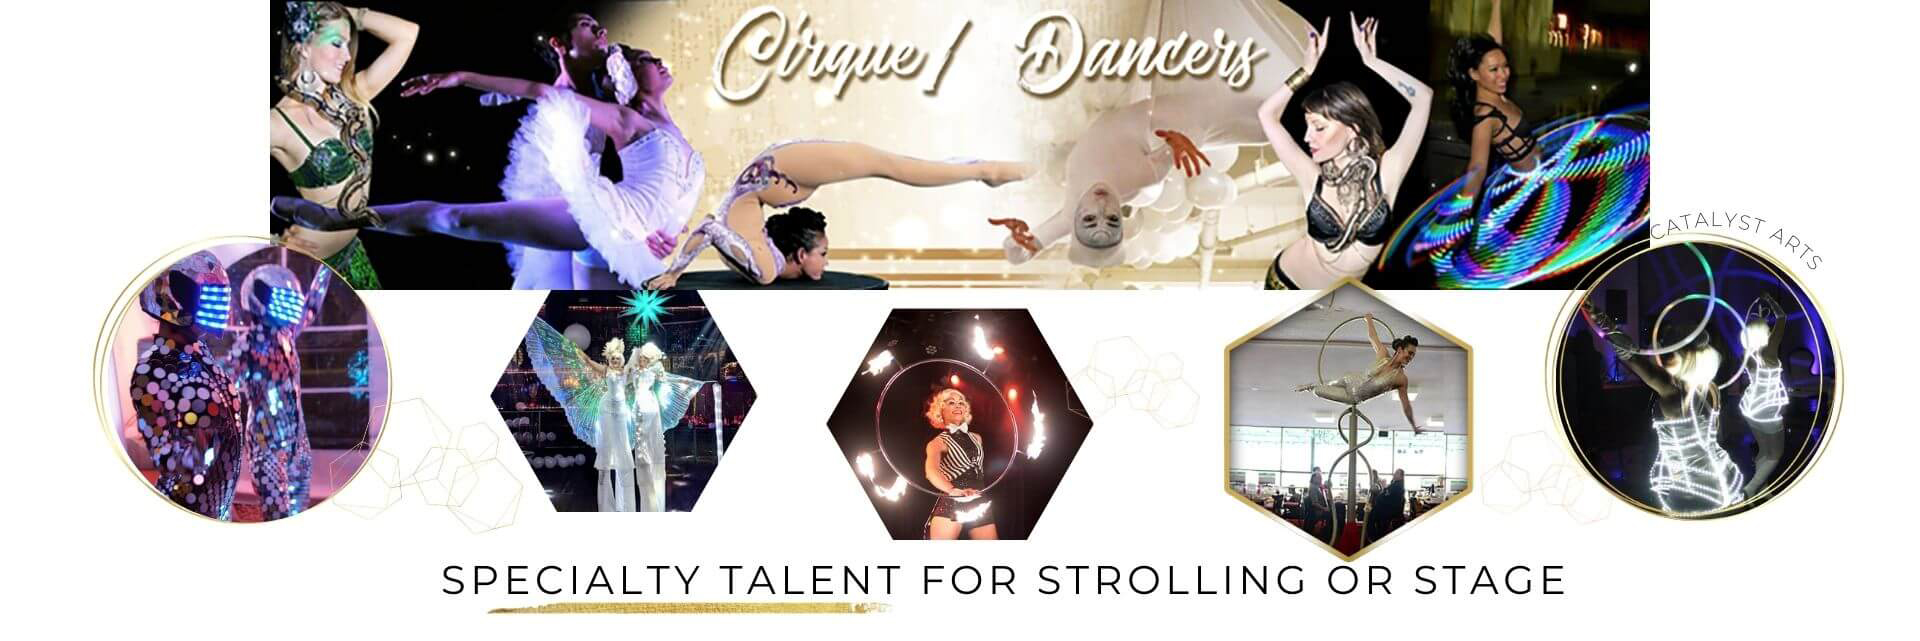 Cirque & Dance Specialty Talent booking for parties by Catalyst Arts